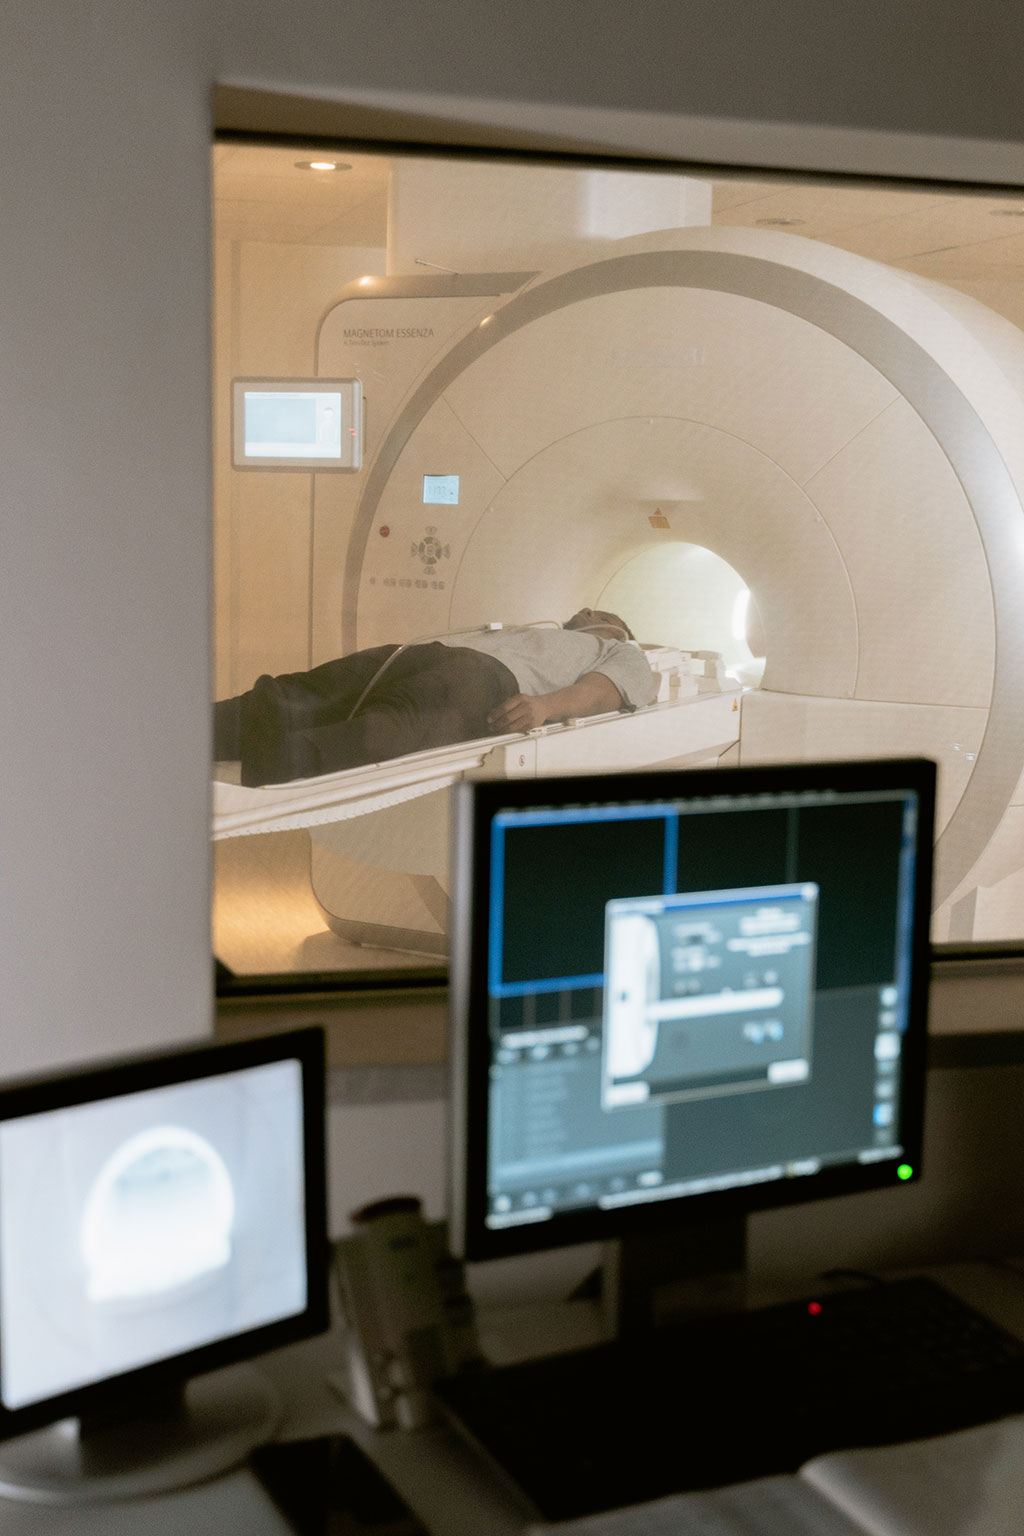 Image: Global diagnostic imaging market is driven by technological advancements (Photo courtesy of Pexels)